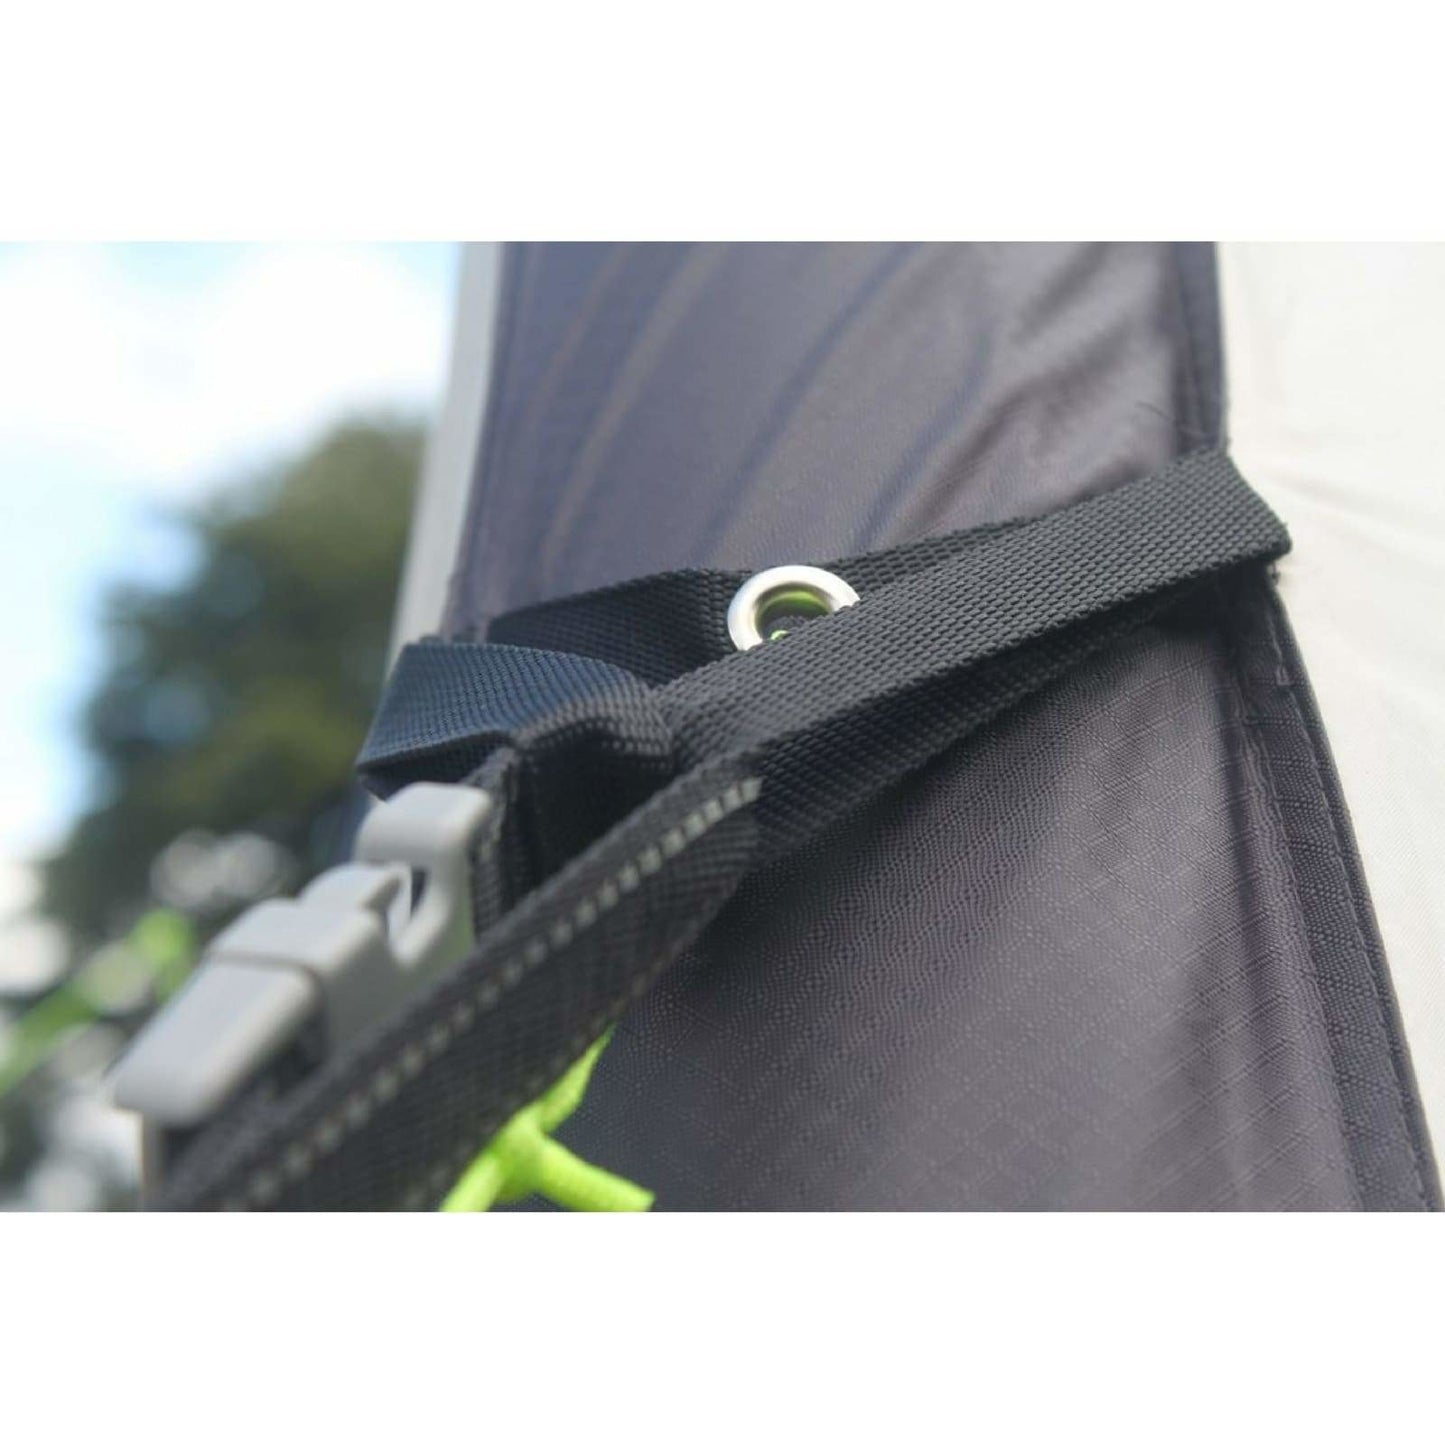 Outdoor Revolution New Reflective Storm Strap (Pair) OR15615 (2019) made by Outdoor Revolution. A Accessories sold by Quality Caravan Awnings